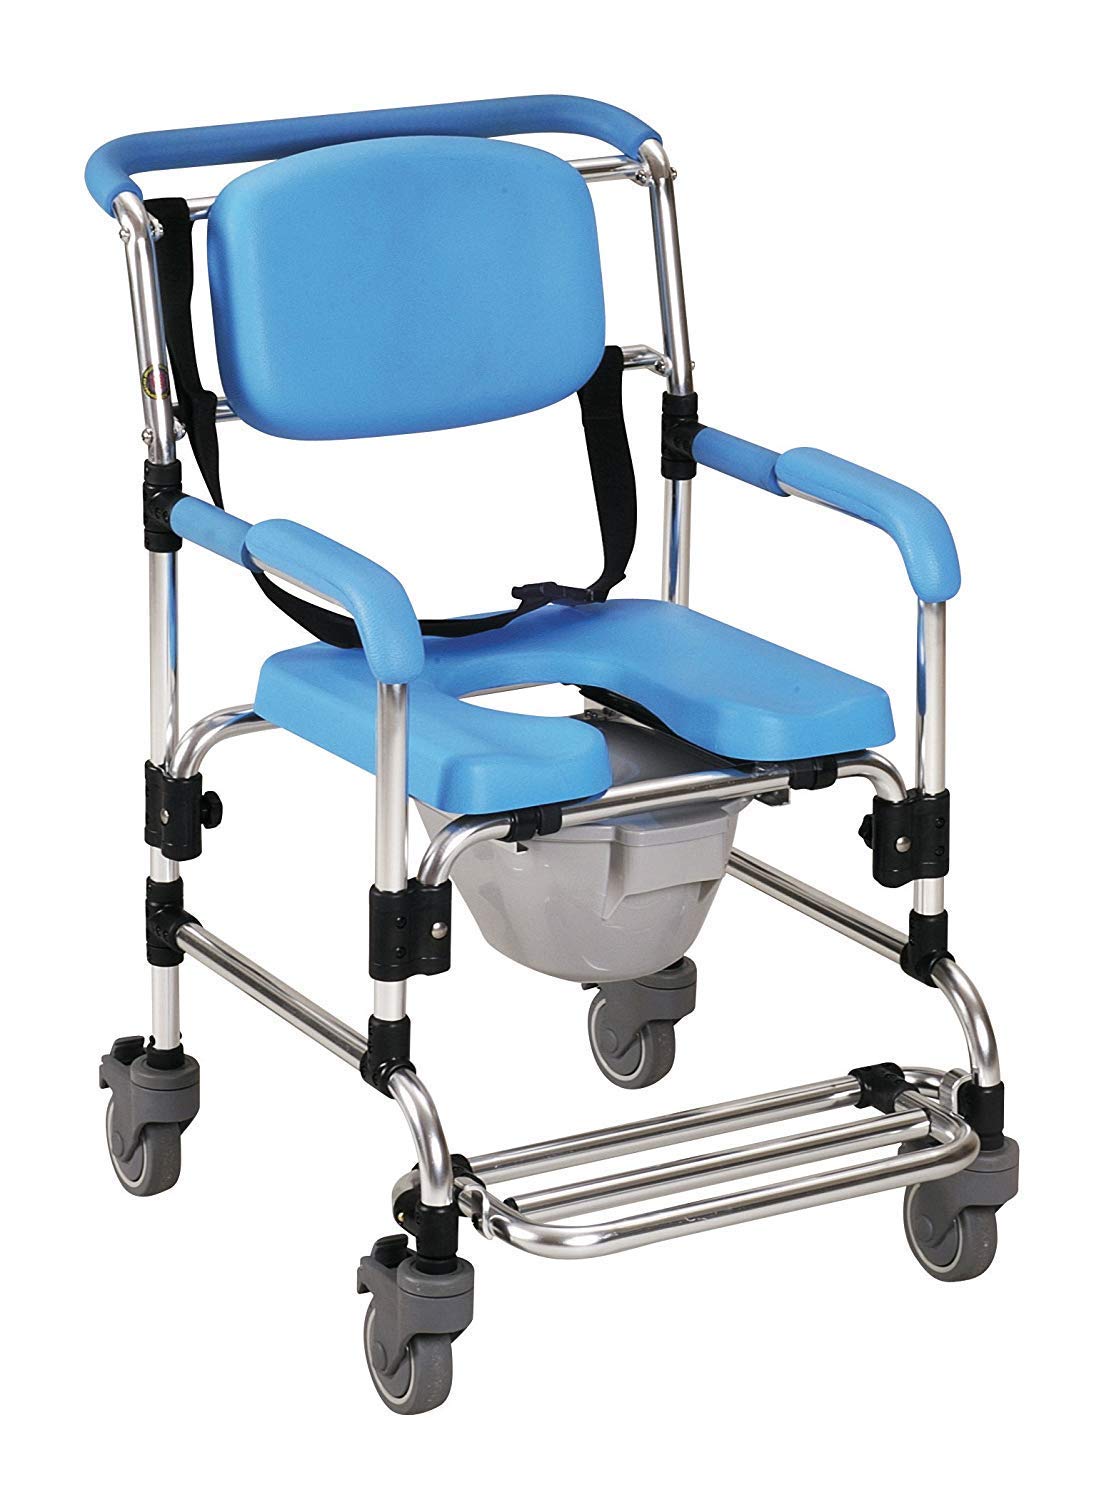 Homecraft Ocean Wheeled Shower Commode Chair, Padded Shower Seat with Wheels and Built In Toilet, Shower Chair and Toilet, Bath Stool for Bathing, Elderly, Disabled, and Limited Mobility